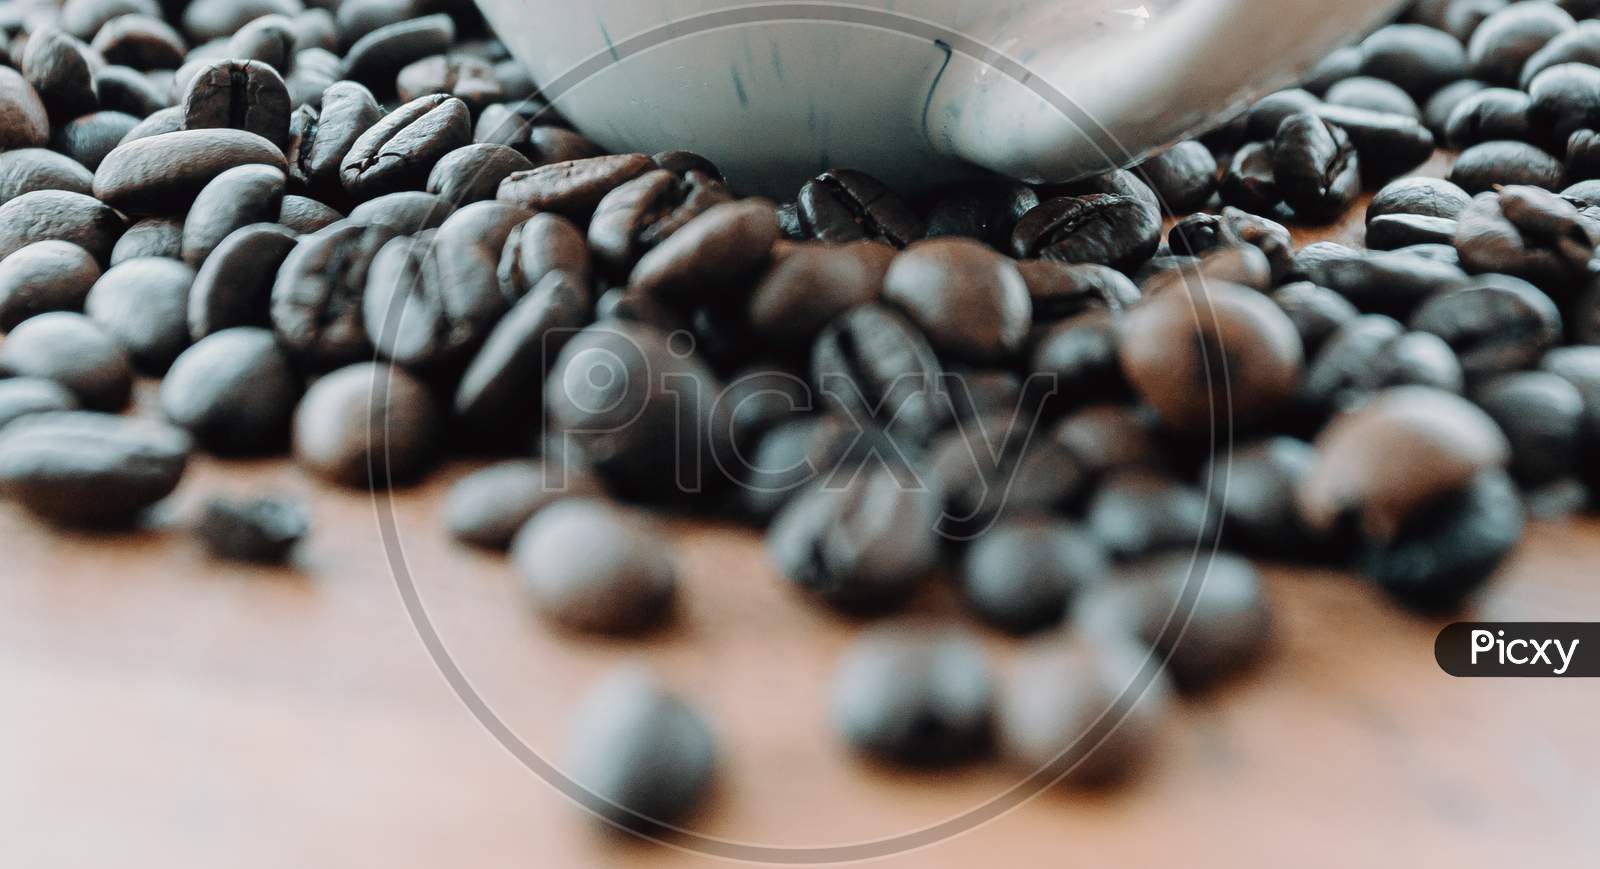 Super Close Up Of Some Grains Of Coffee Near A White Cup And Over A Wood Table